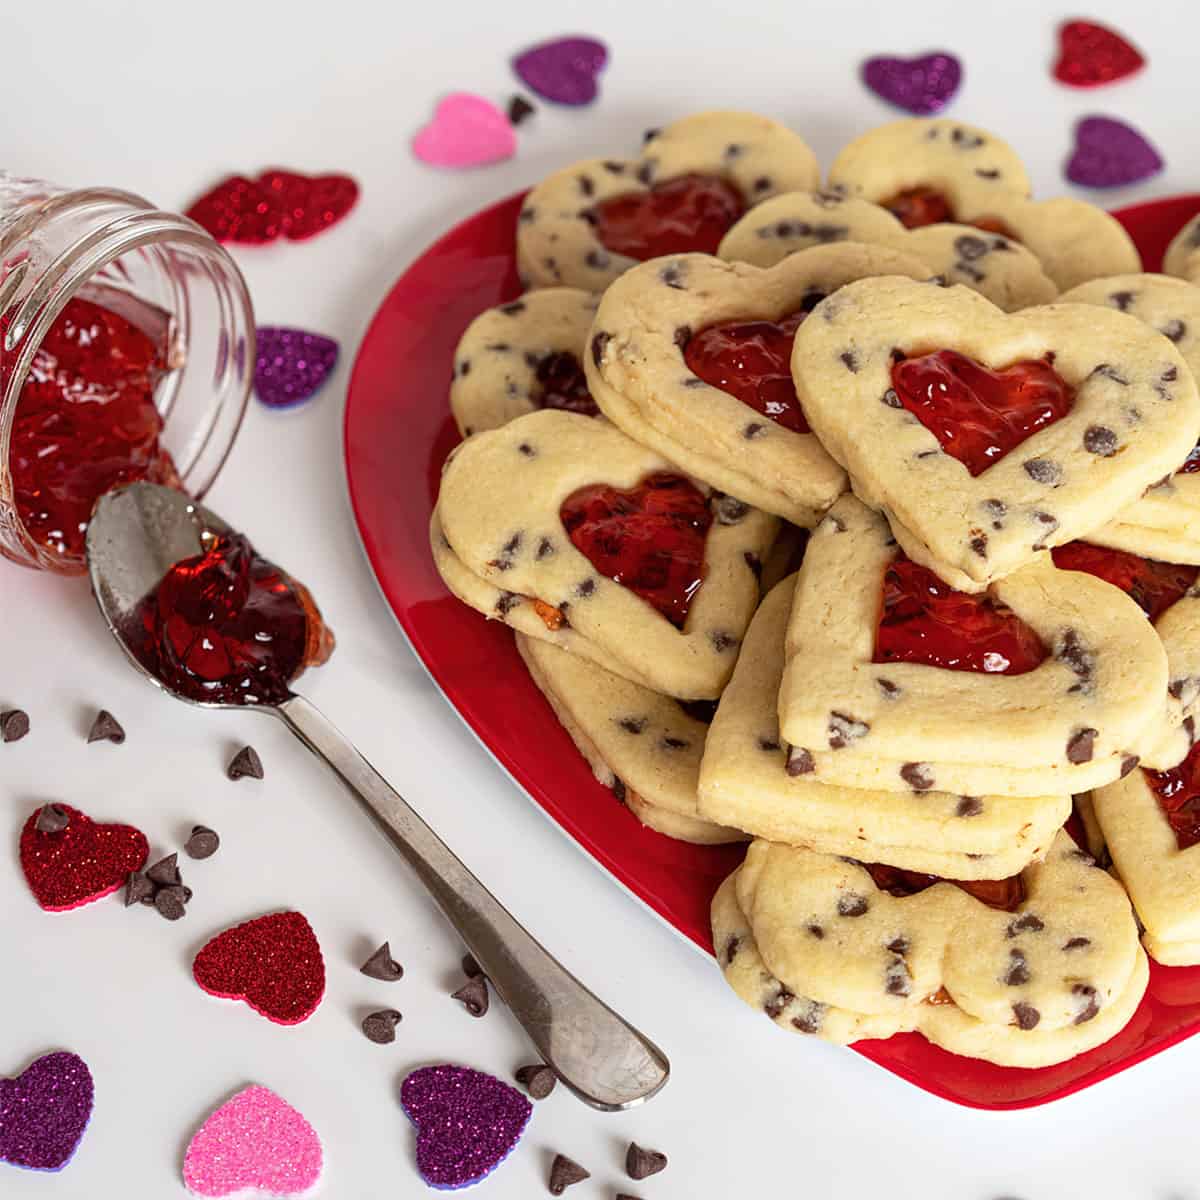 Strawberry and chocolate chip heart feature photo